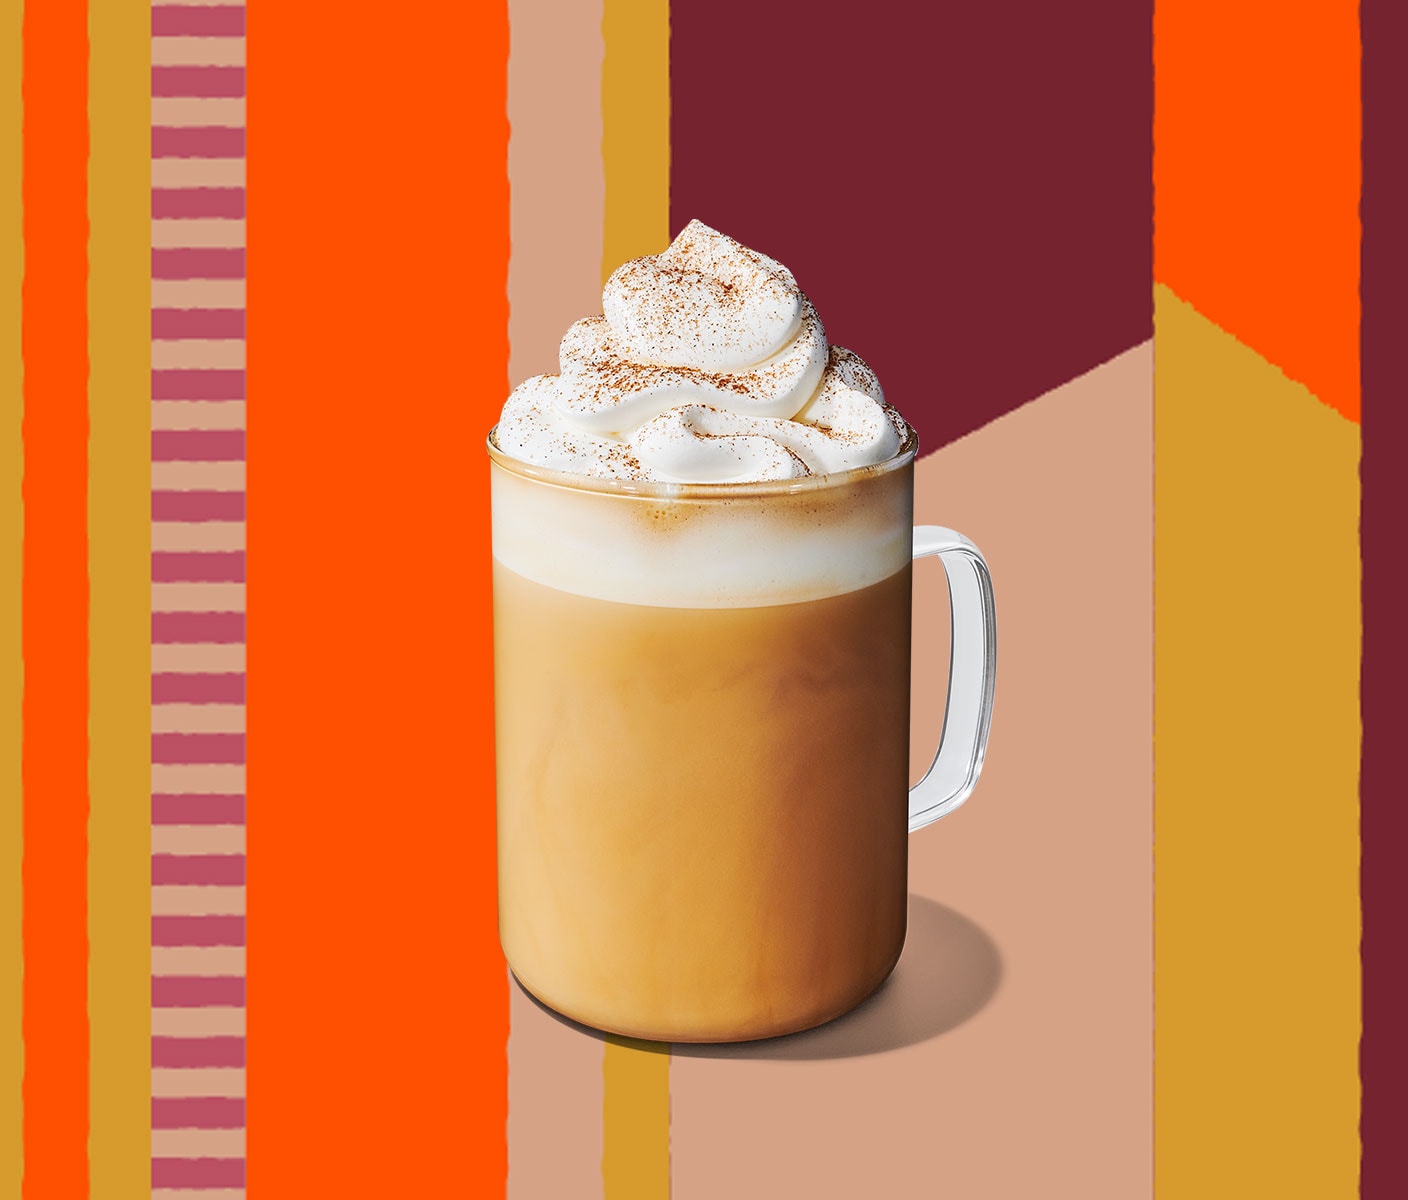 A creamy latte with whipped cream on top in a glass with a handle.